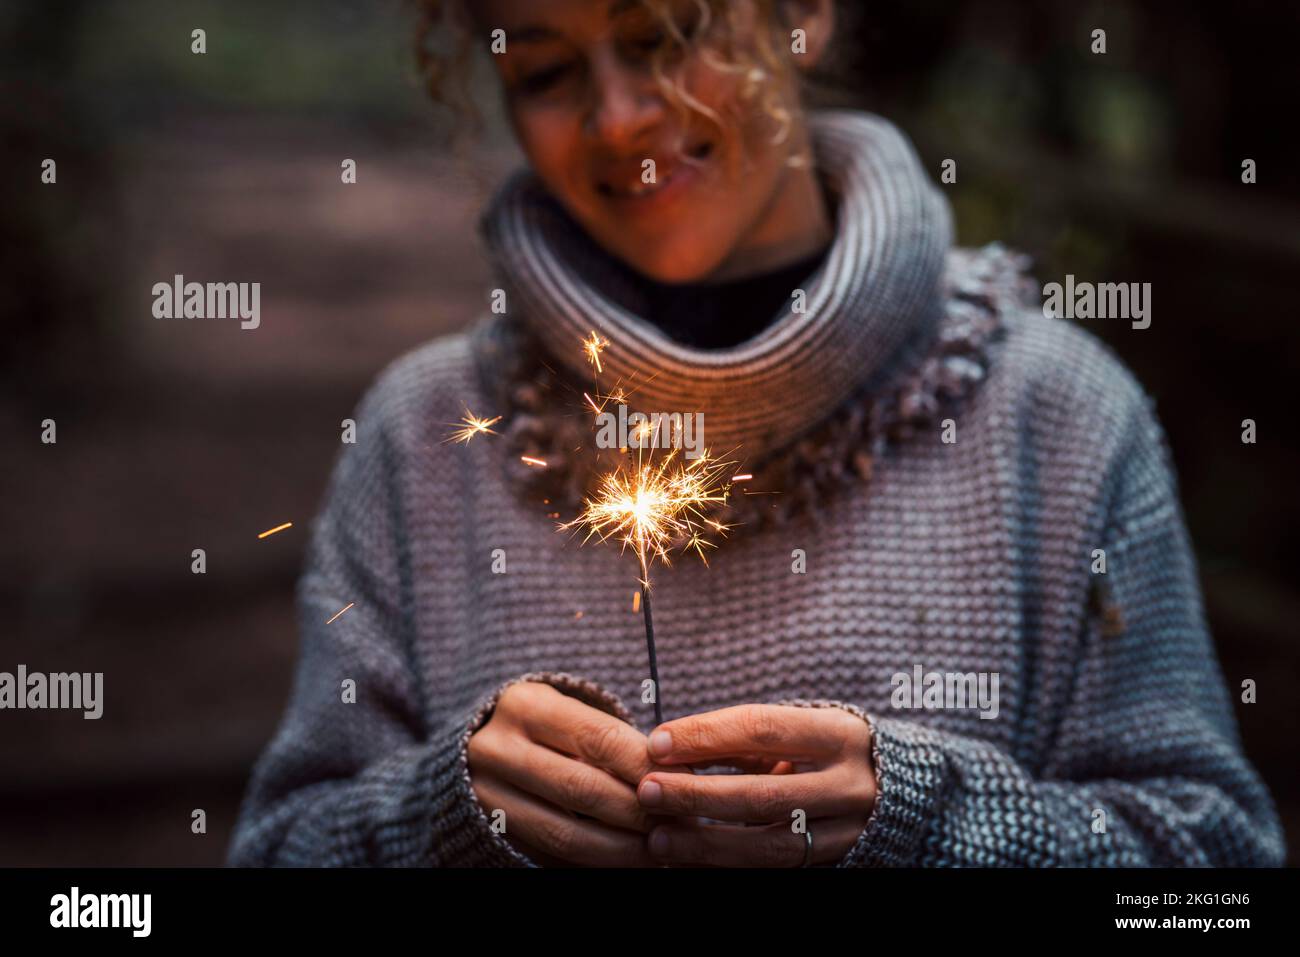 Front view of happy woman celebrating with sparkler light in outdoor. Foreground focus on fire and female people smiling in background. New year eve a Stock Photo